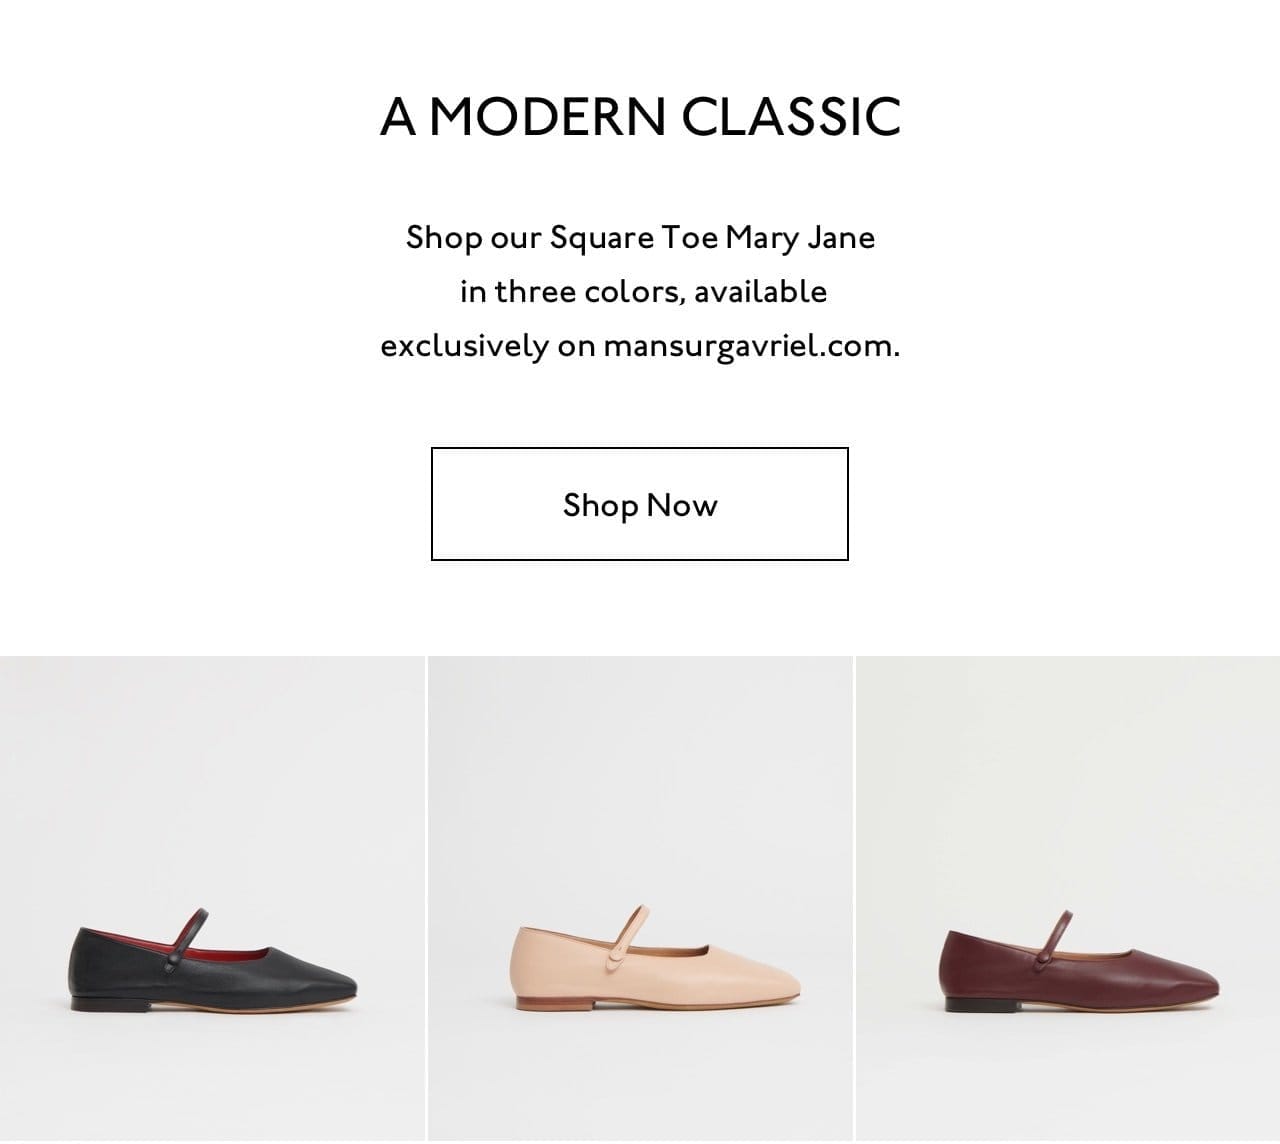 A Modern Classic. Shop our Square Toe Mary Jane in three colors, available exclusively on mansurgavriel.com.